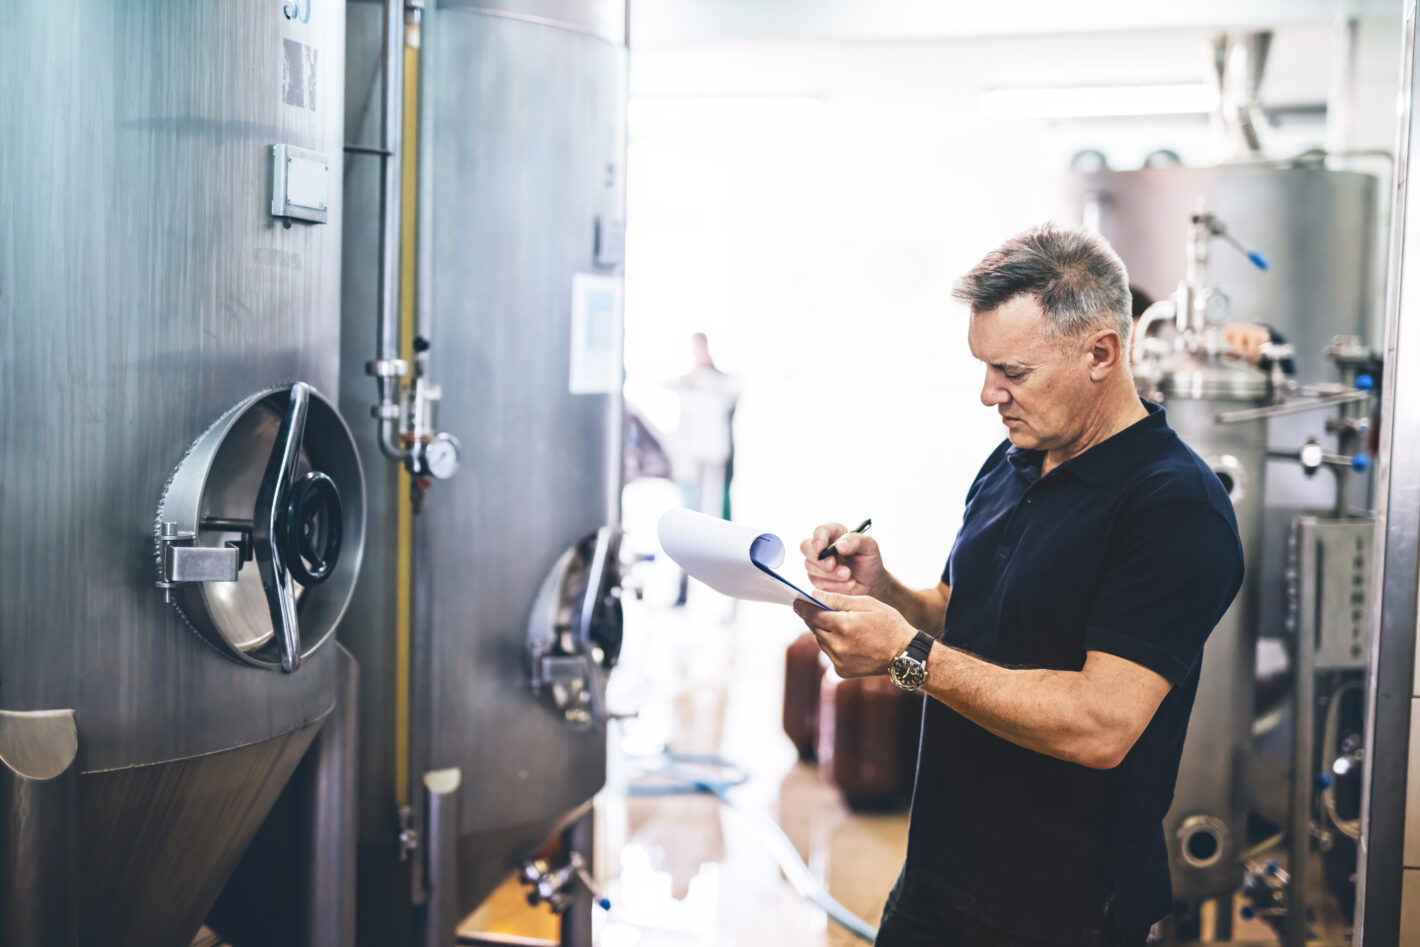 Manager of brewery inspecting equipment producing craft beer